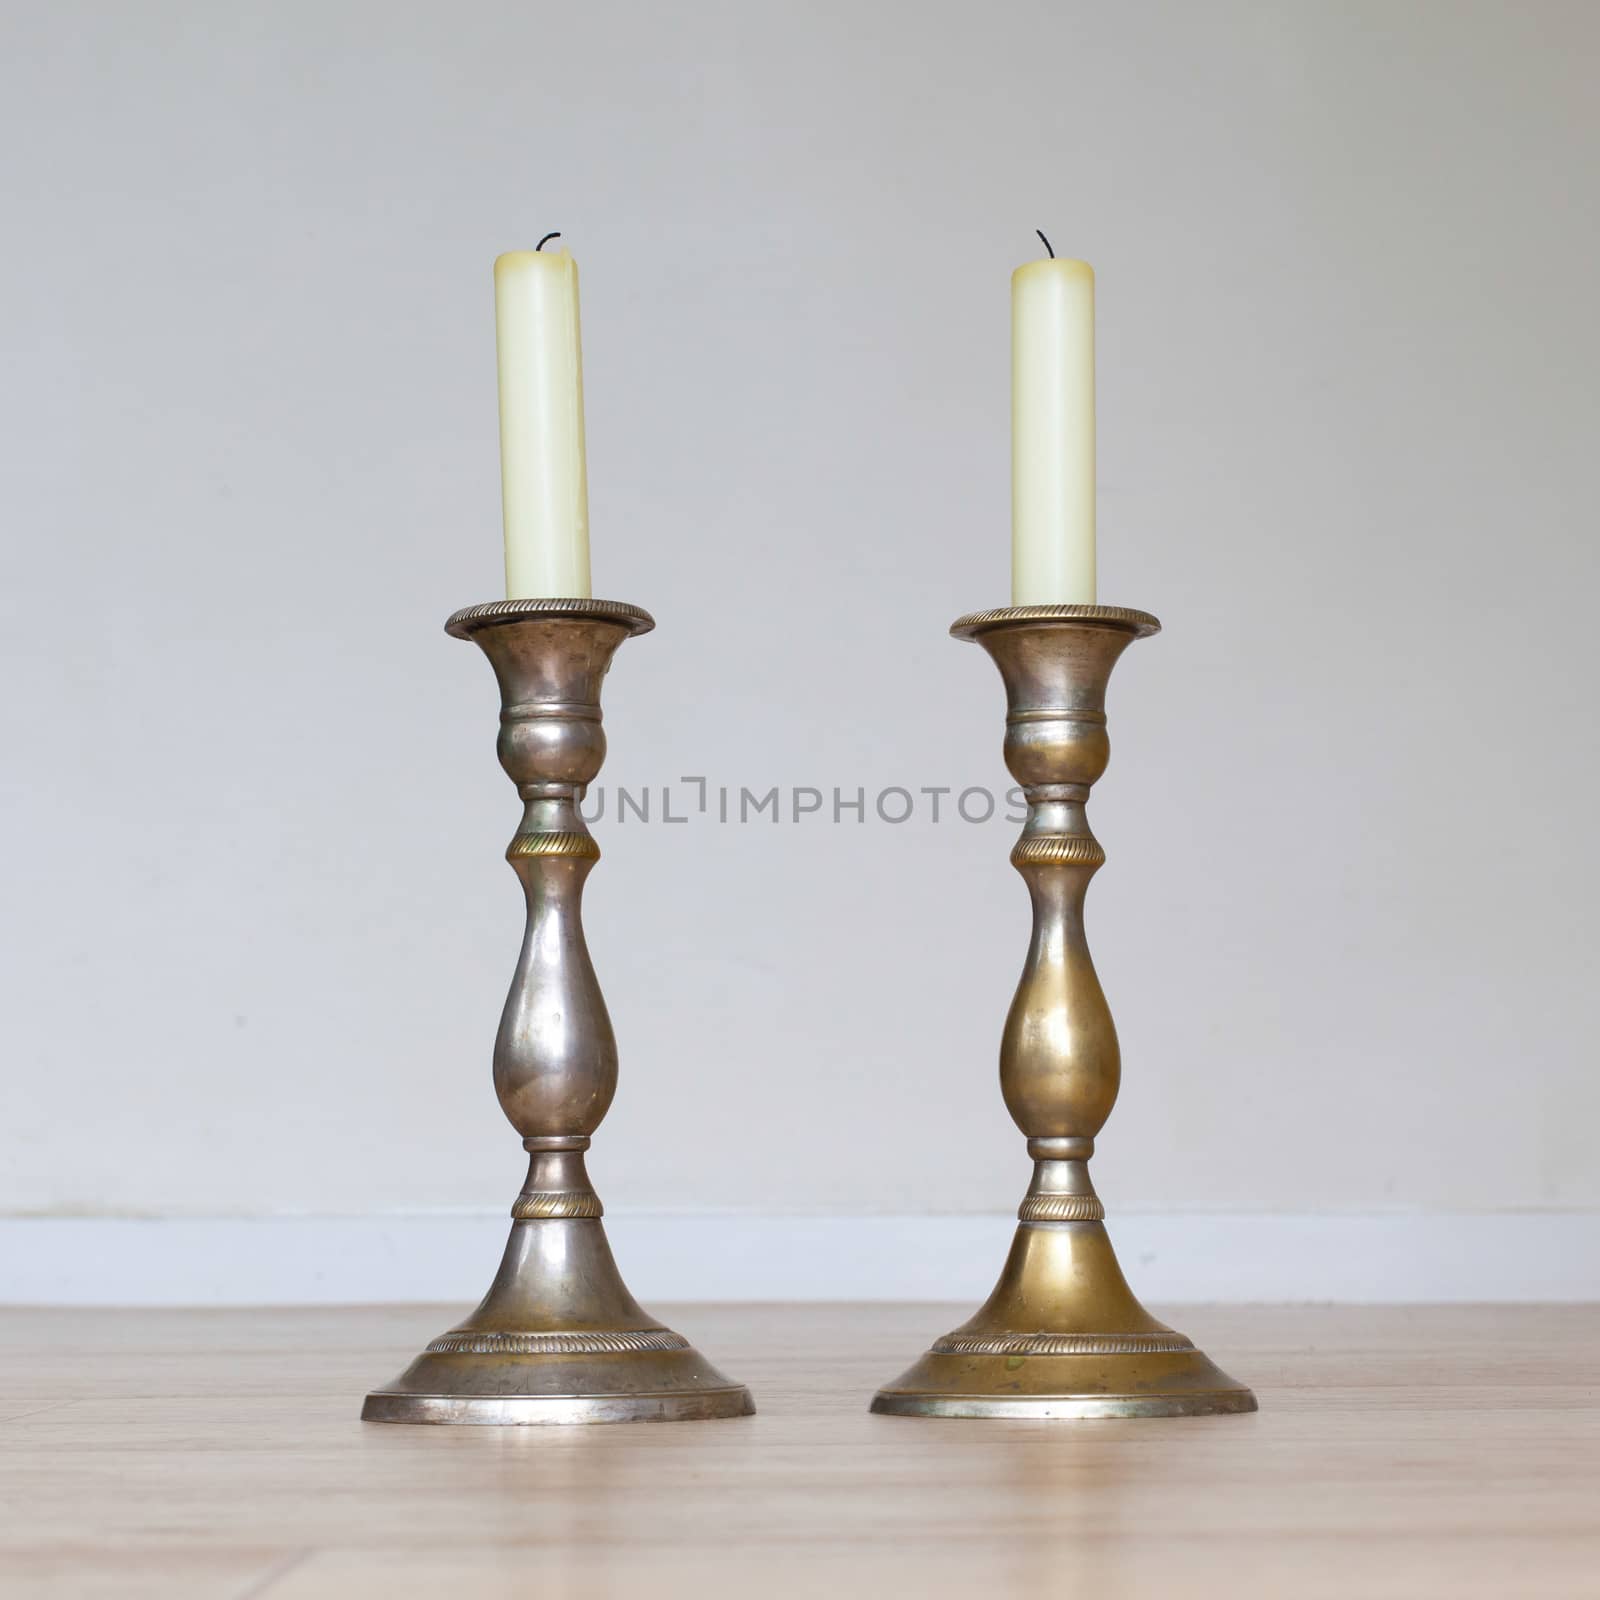 Burning candle on wooden table, white background